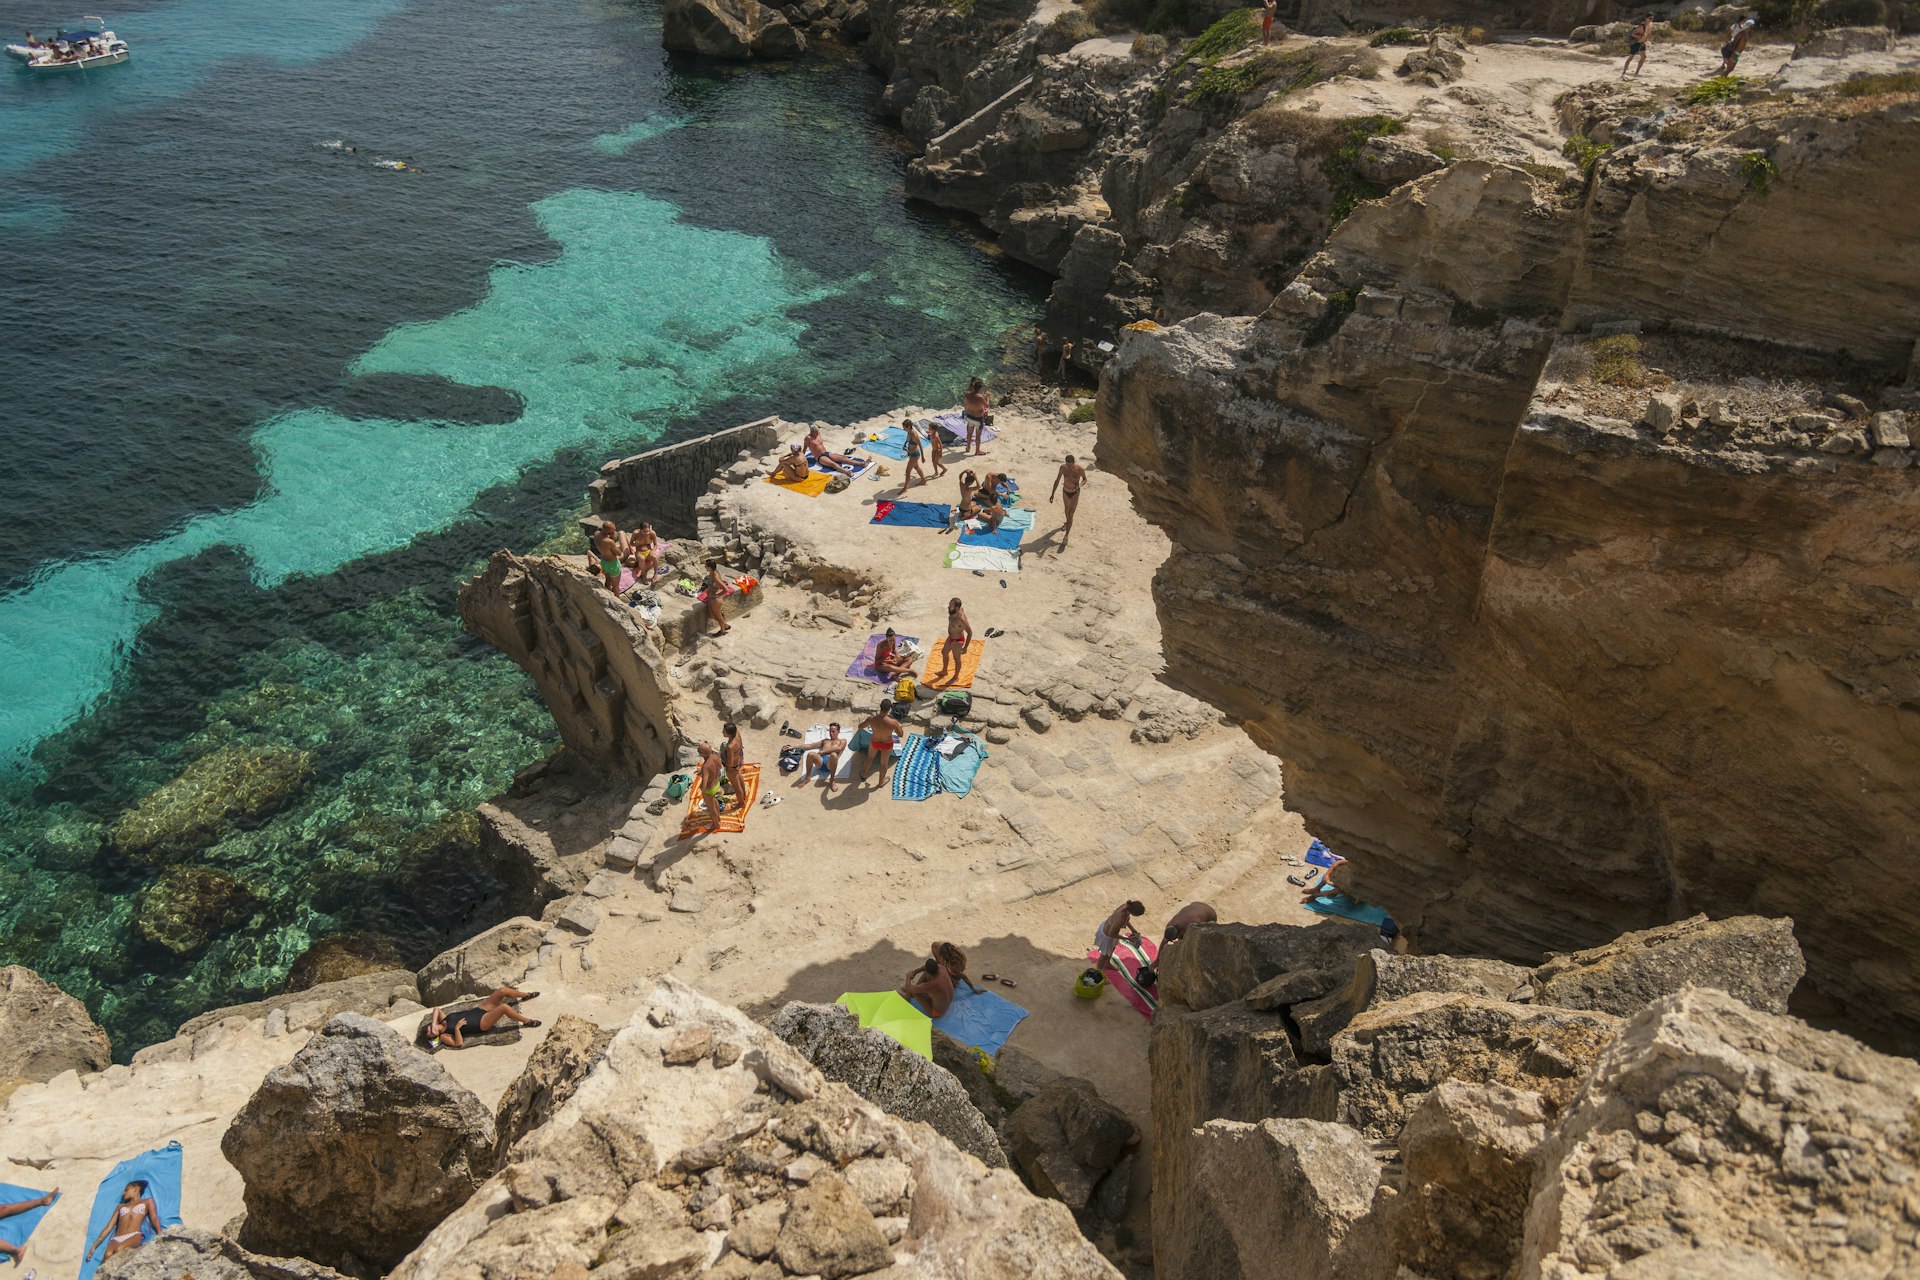 Aerial view of people sunbathing on a cove beach on Favignana, one of the Egadi Islands near Sicily, Italy